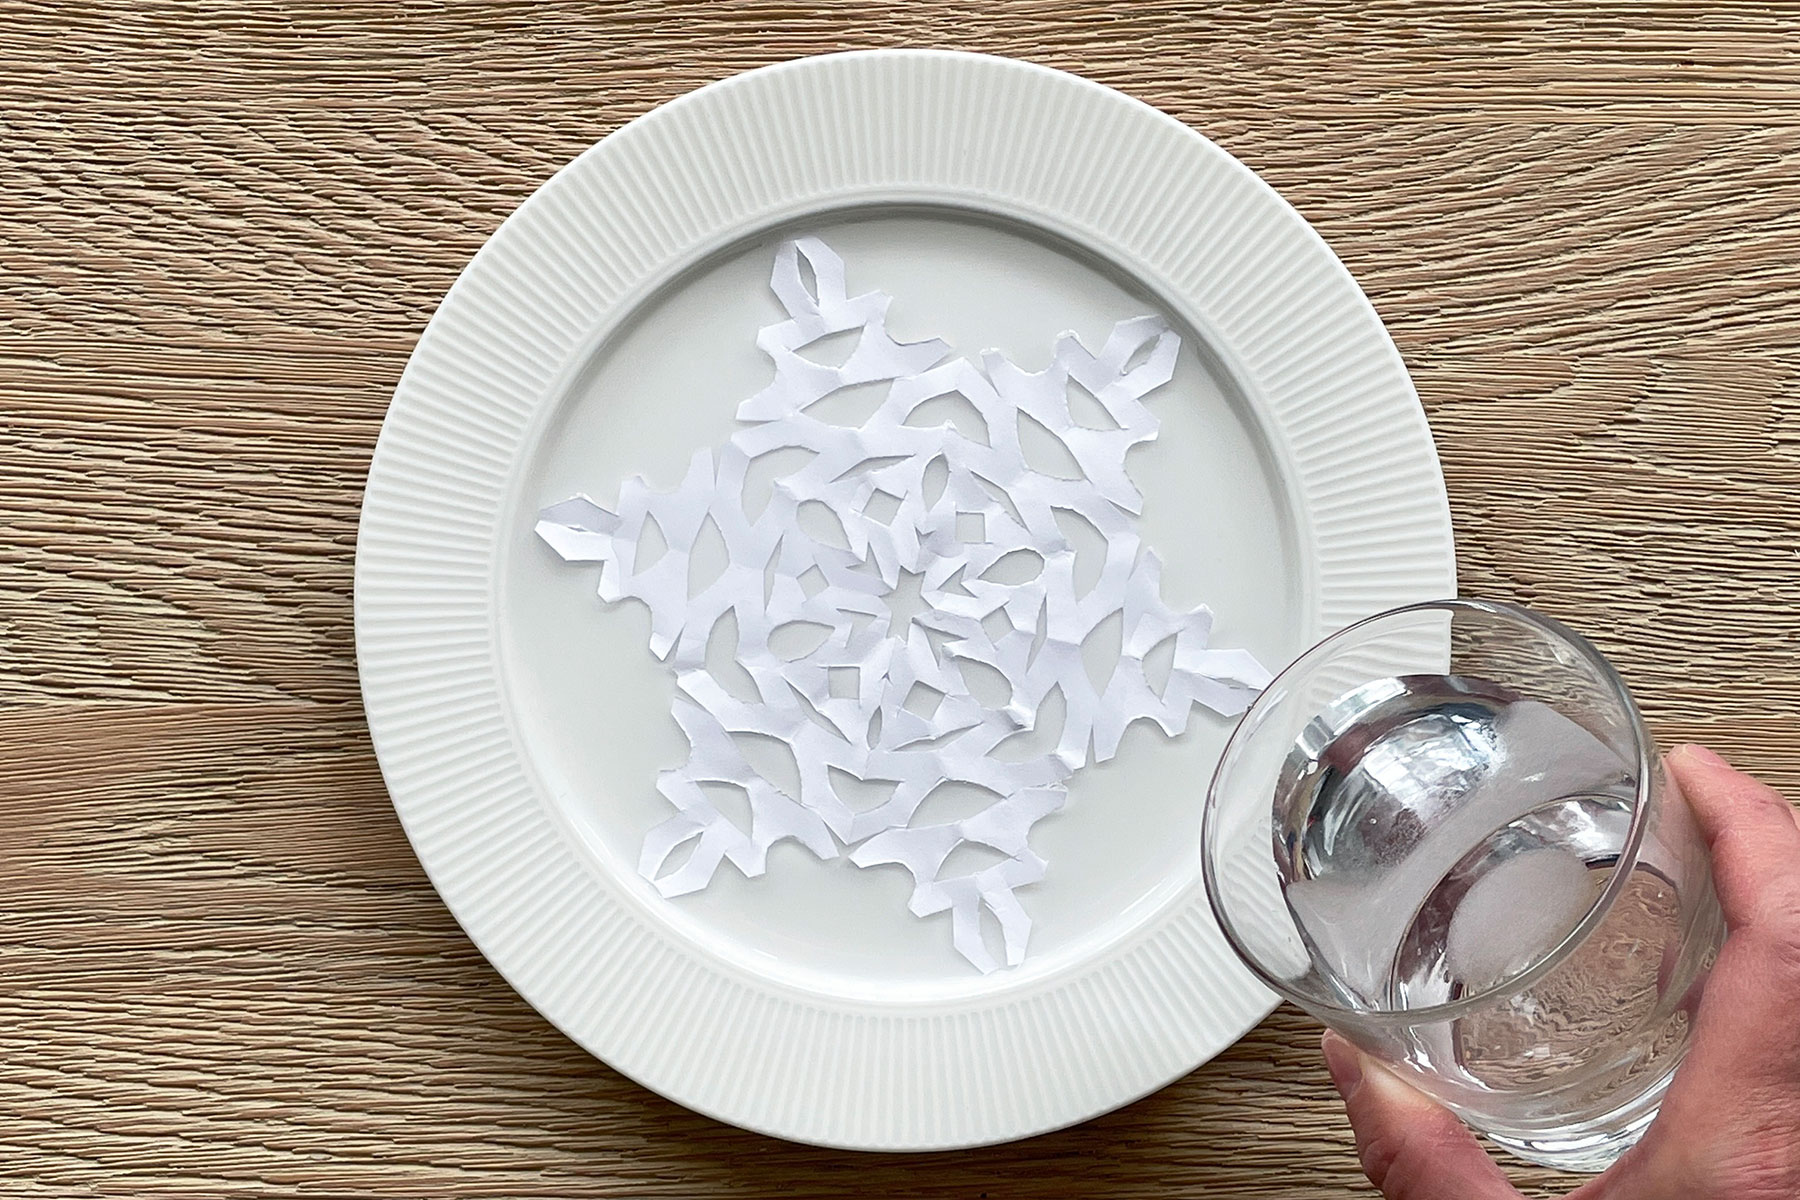 A photo of a paper snowflake laid out on a plate with a hand holding a cut of salt water reading to pour